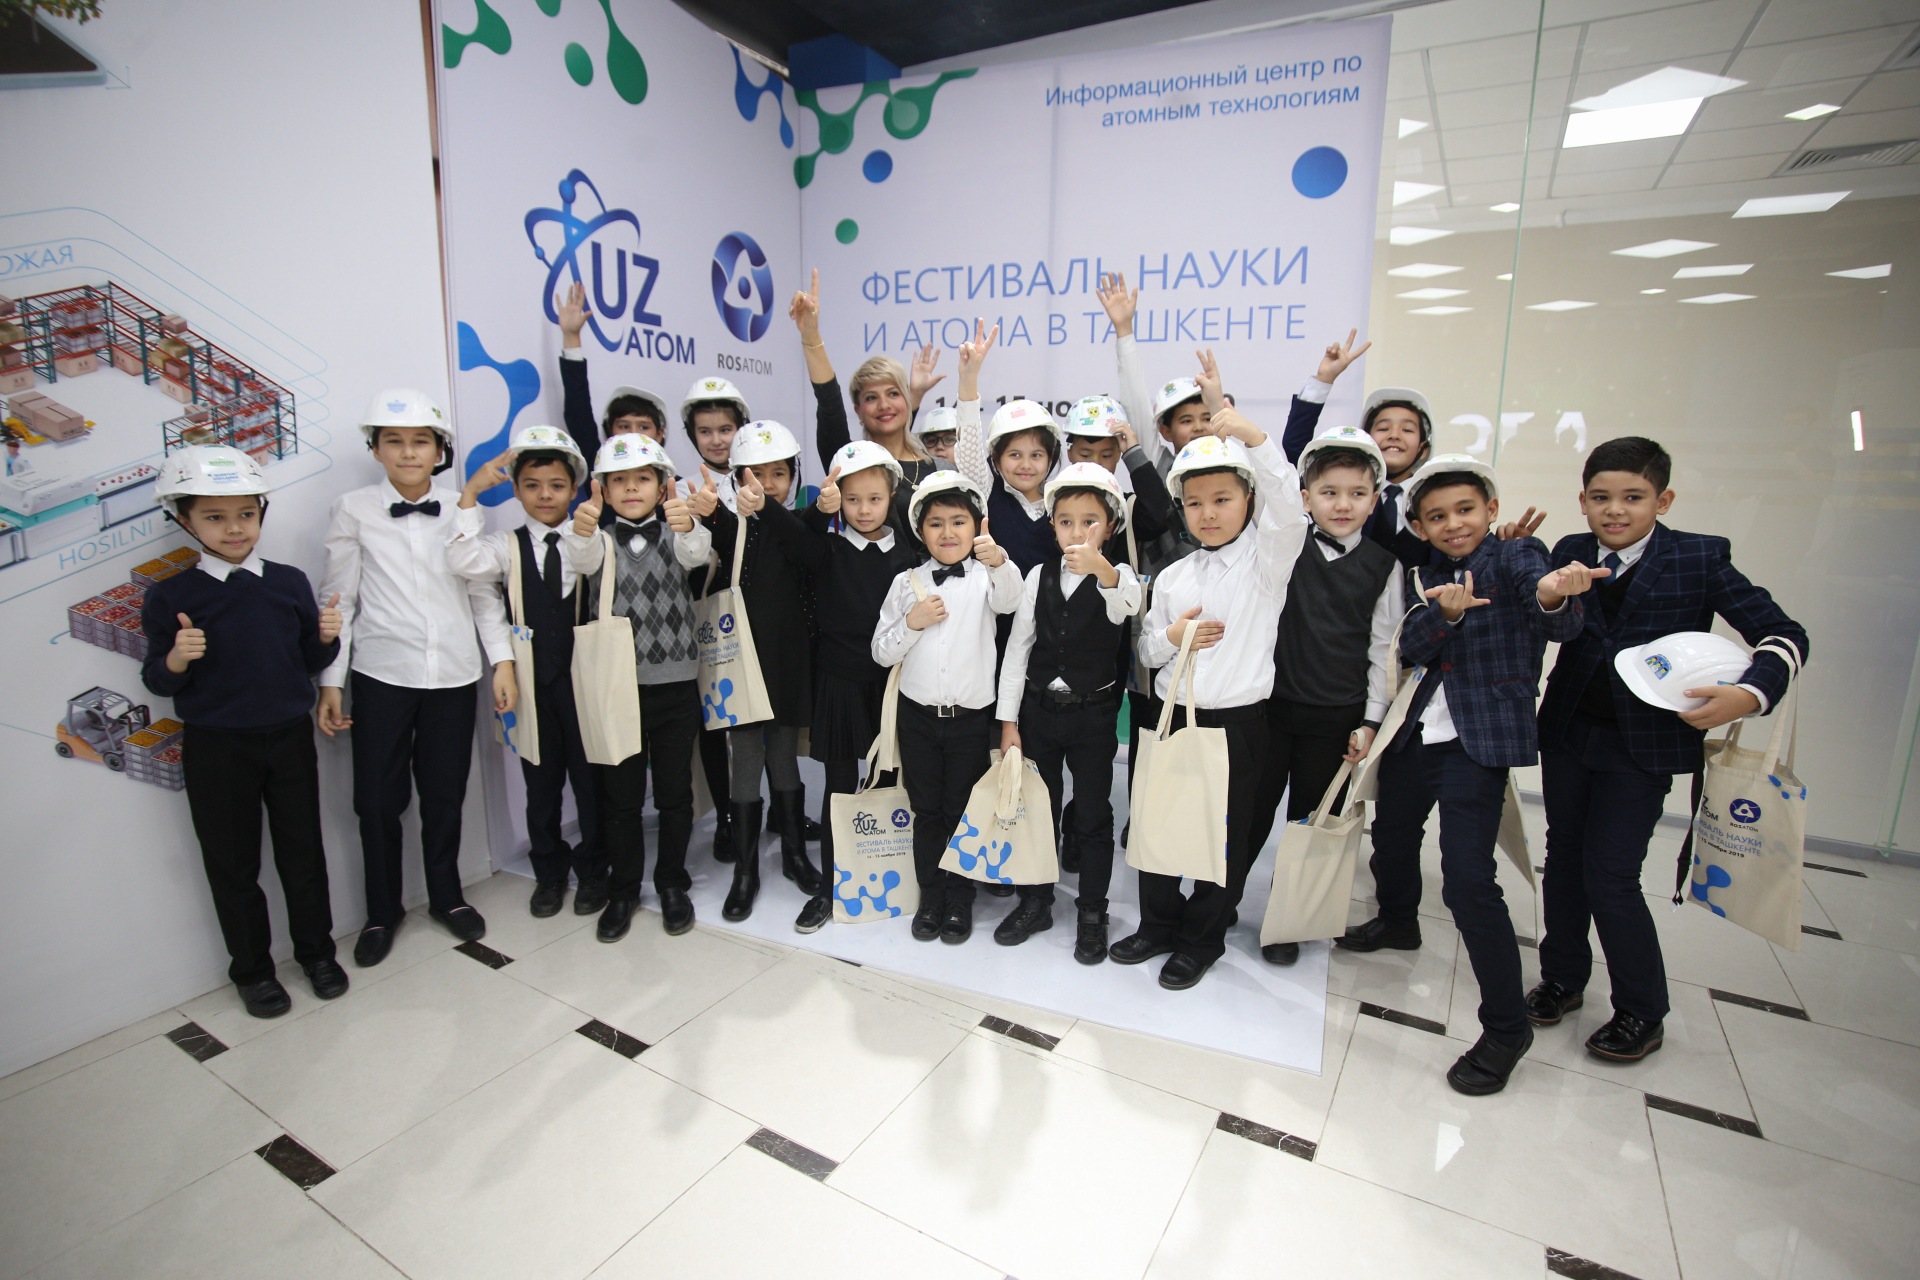 First Festival of Science and Atom in Tashkent